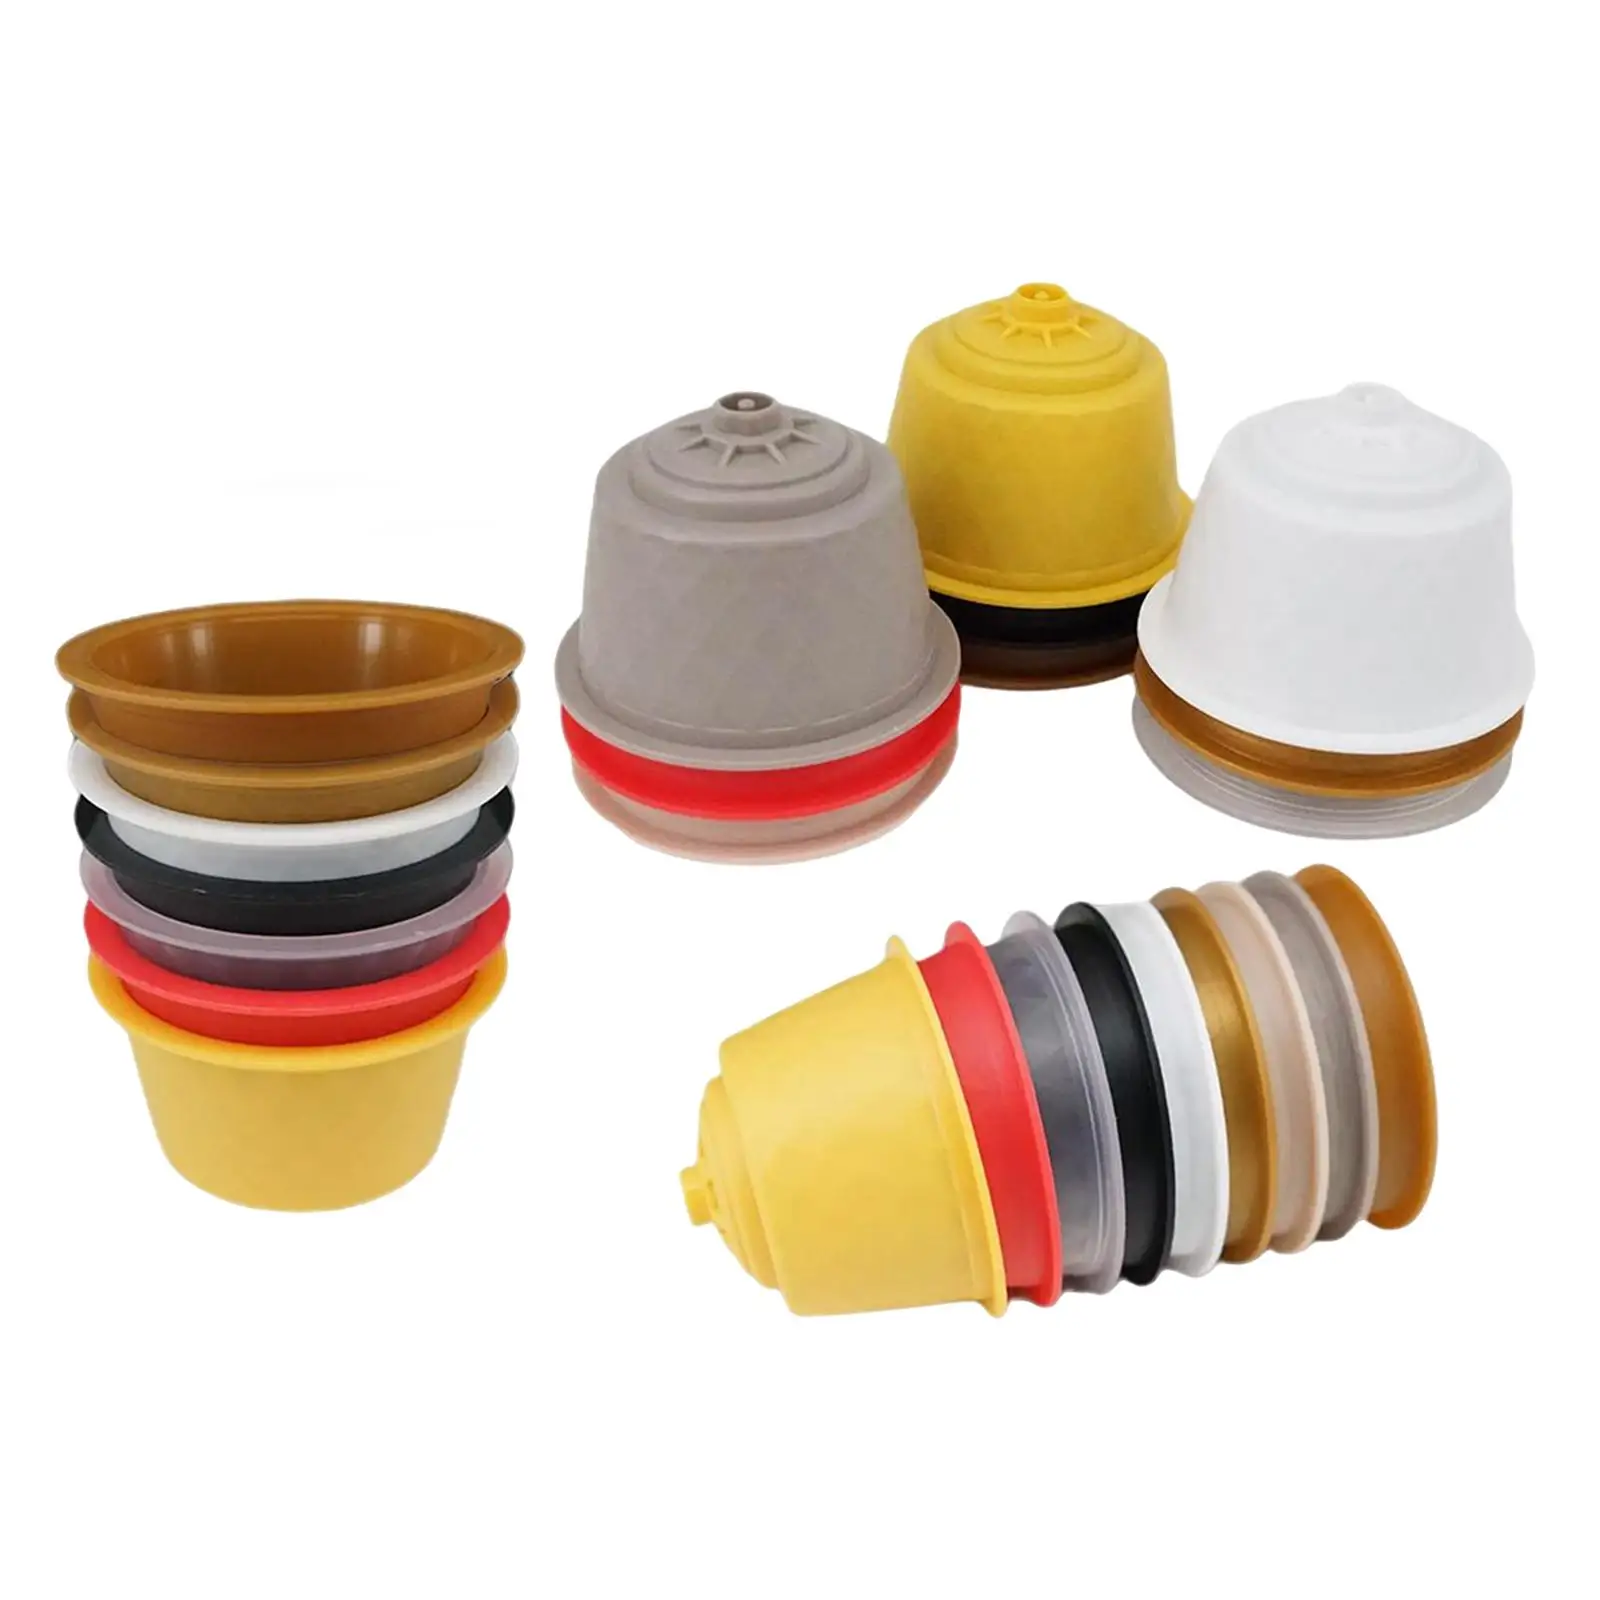 25Pcs Coffee Capsules Combo Set Portable Disposal Pods for Office Home Cafe